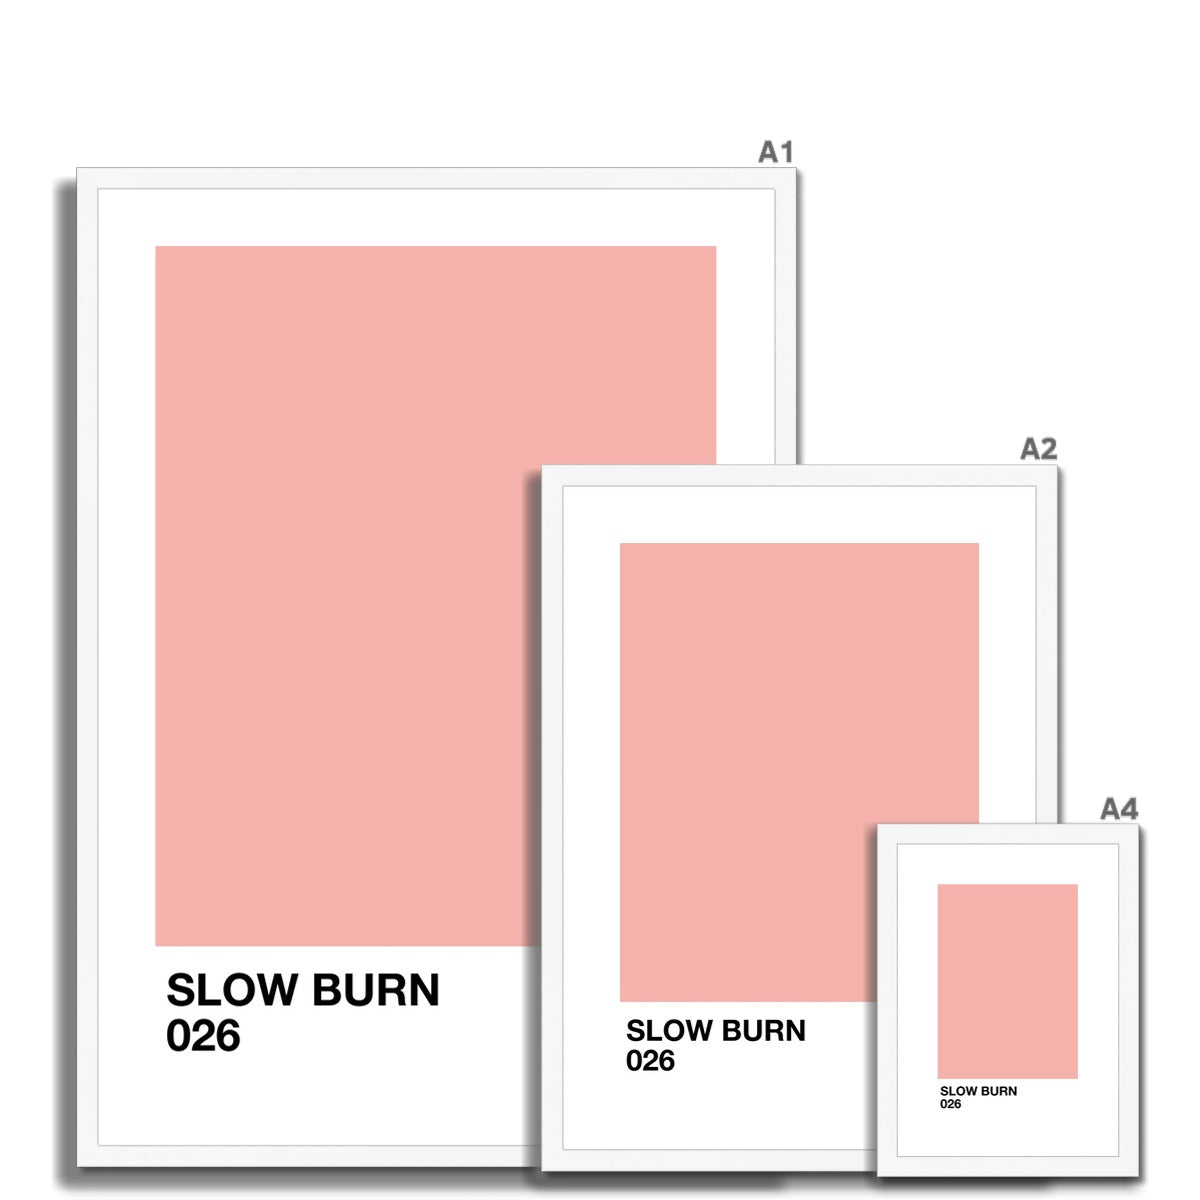 © les muses / Shades is a collection of color shade wall art prints perfect for a modern or minimalist gallery wall. The pastel color block posters have a minimal aesthetic and comes in an array of dreamy colors.